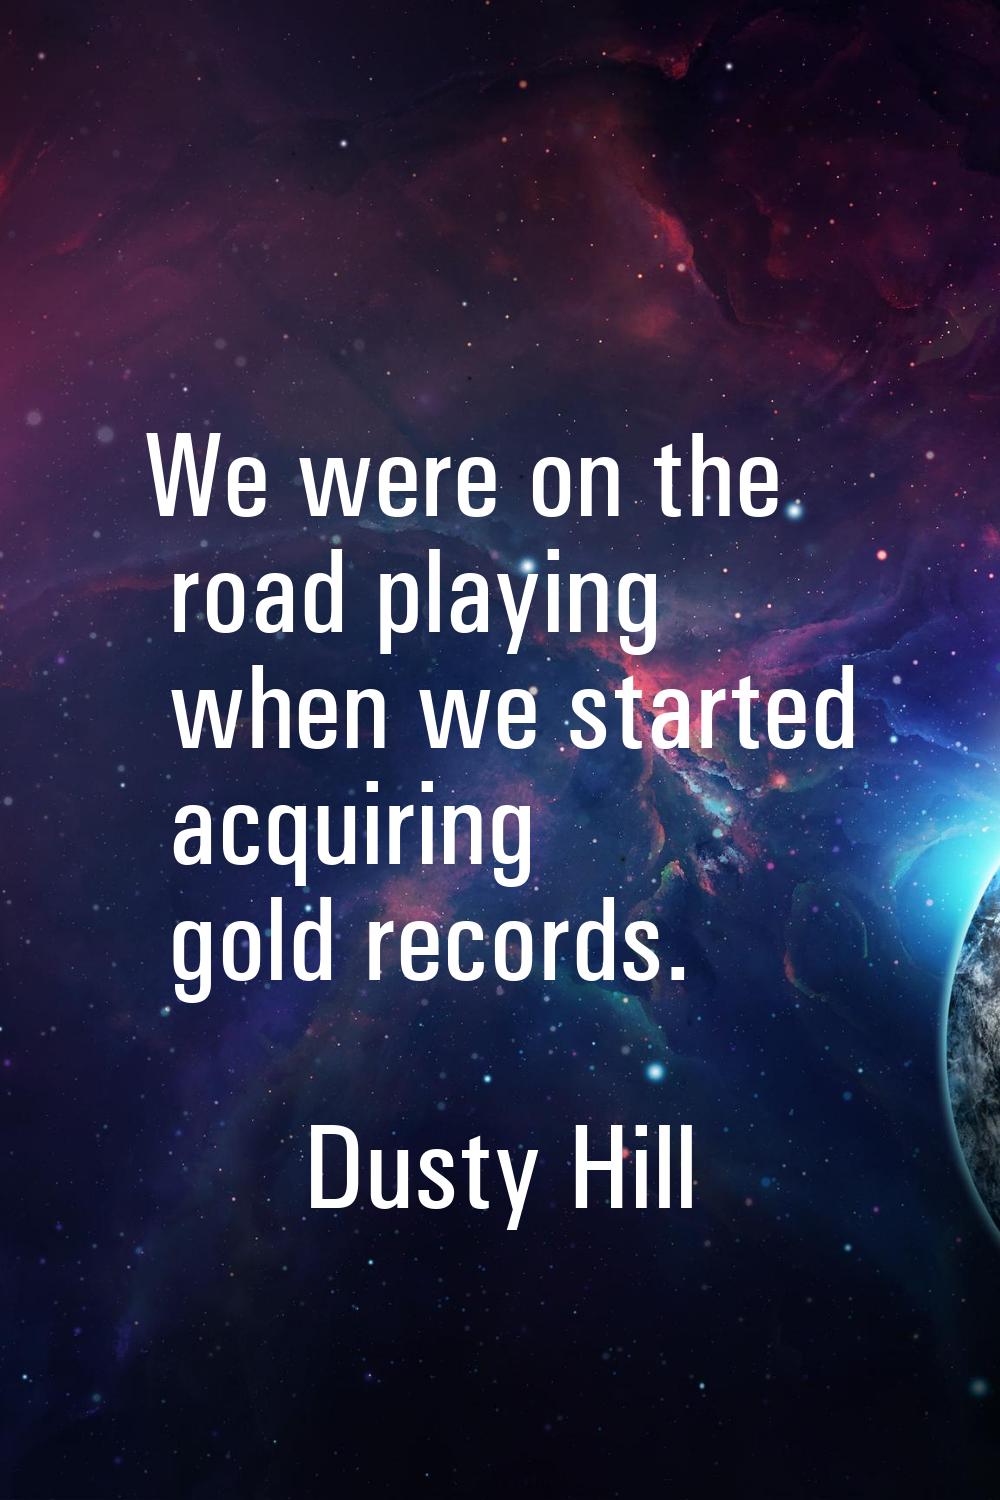 We were on the road playing when we started acquiring gold records.